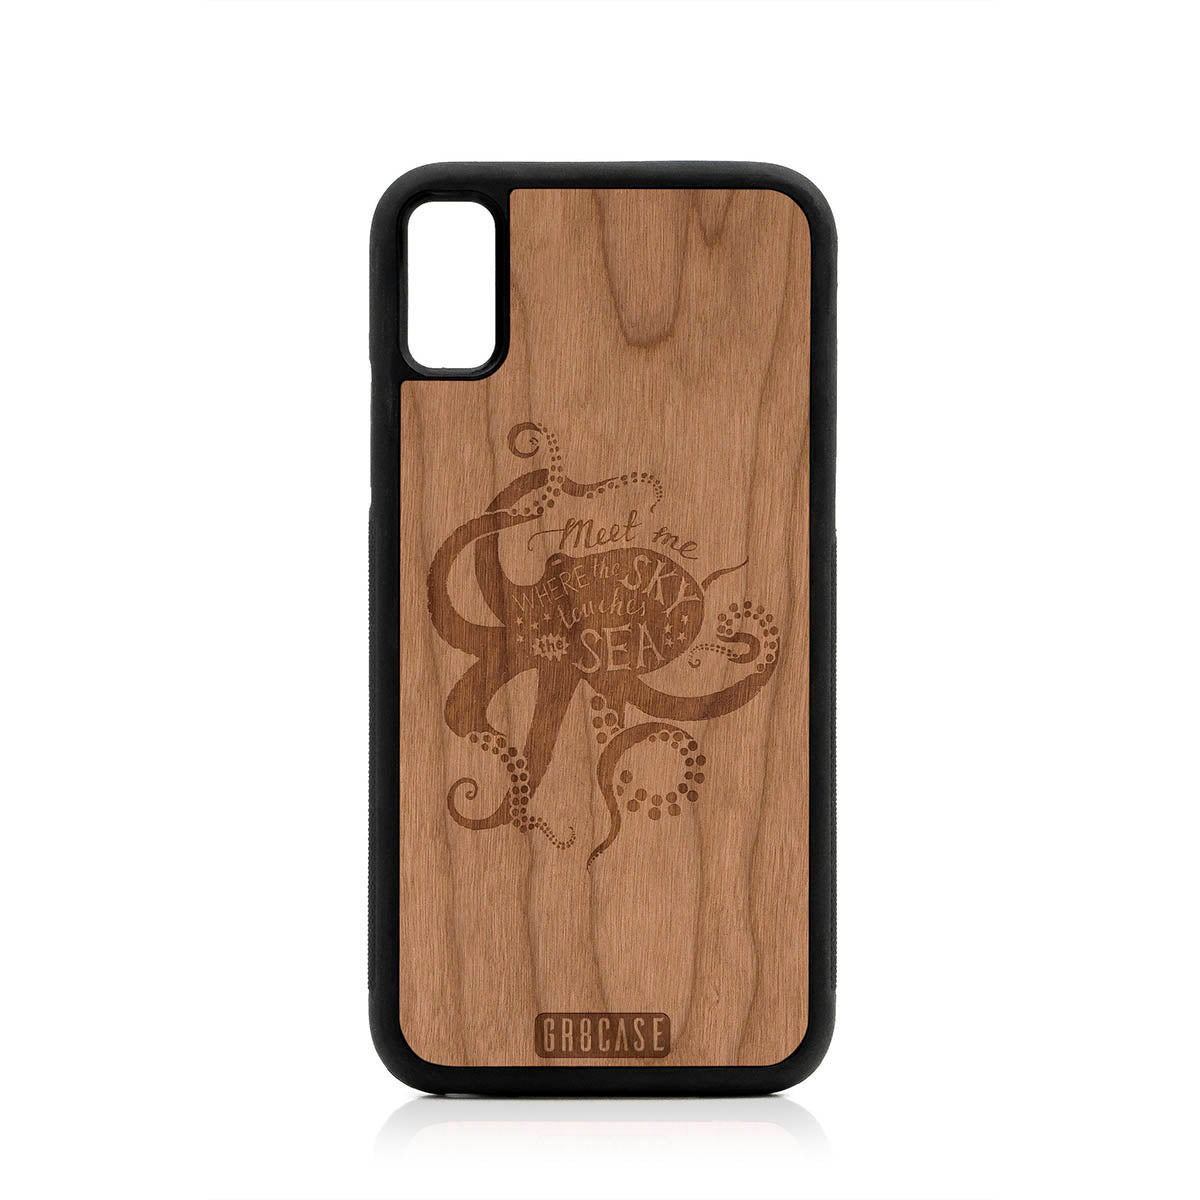 Meet Me Where The Sky Touches The Sea (Octopus) Design Wood Case For iPhone X/XS